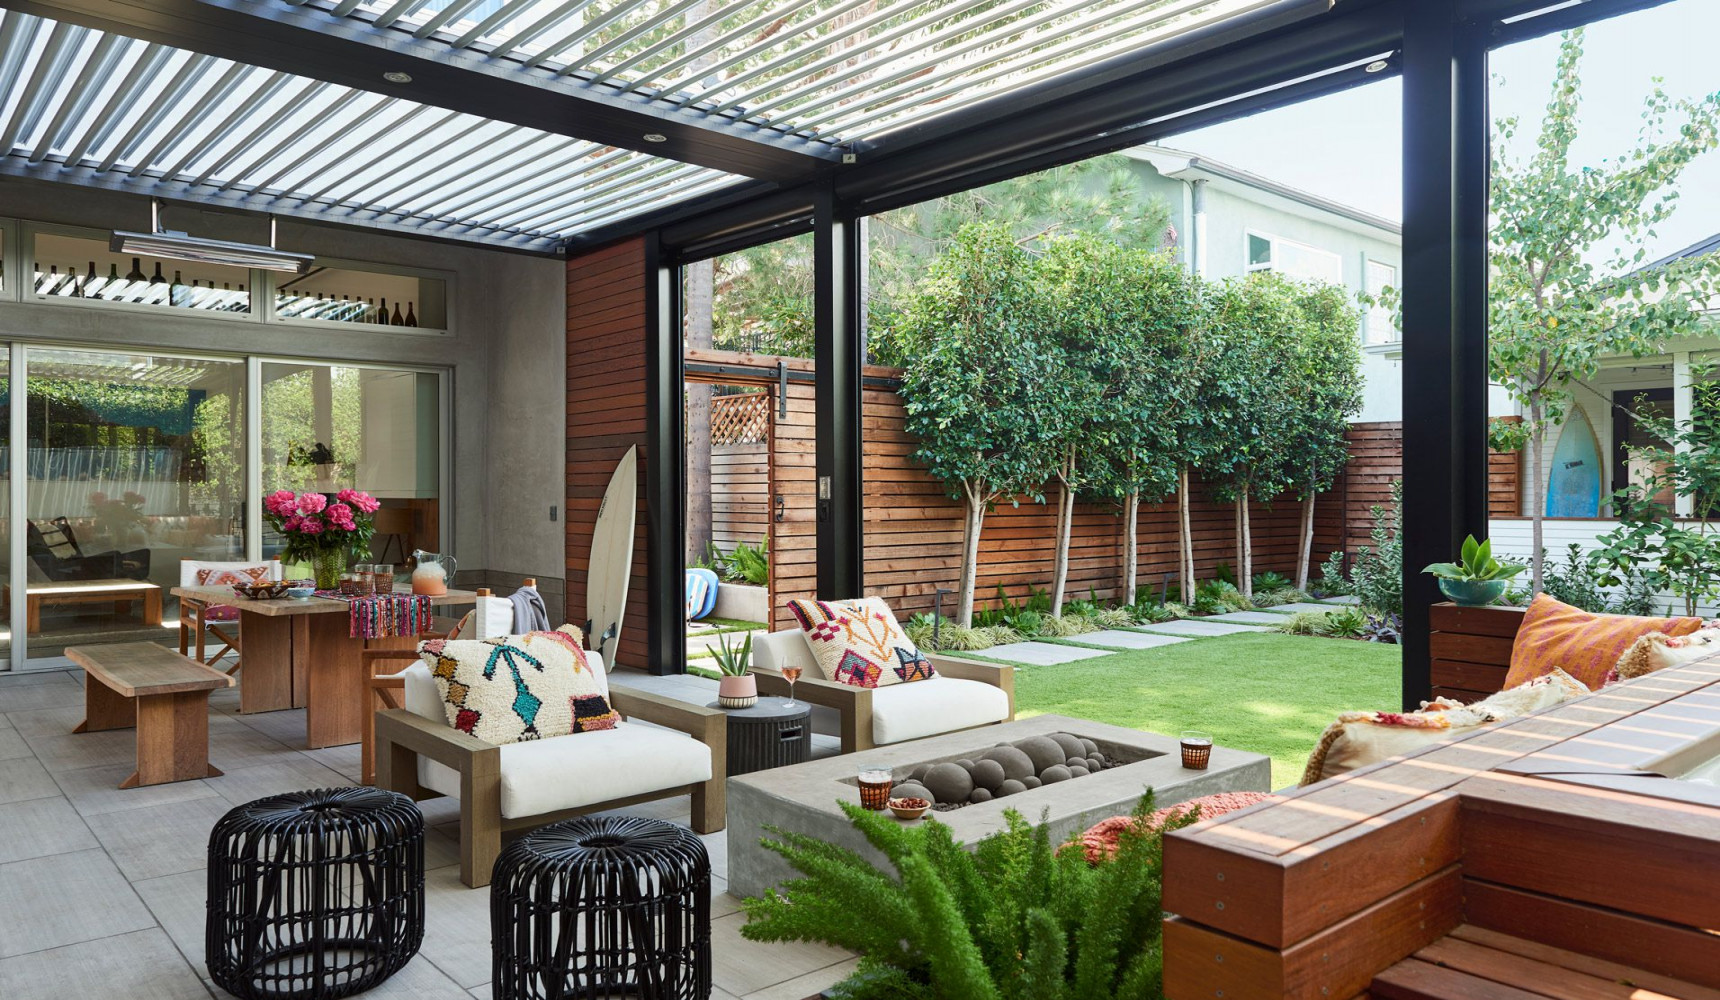 Outdoor Covered Patio Ideas - Home Decorating Colour Ideas